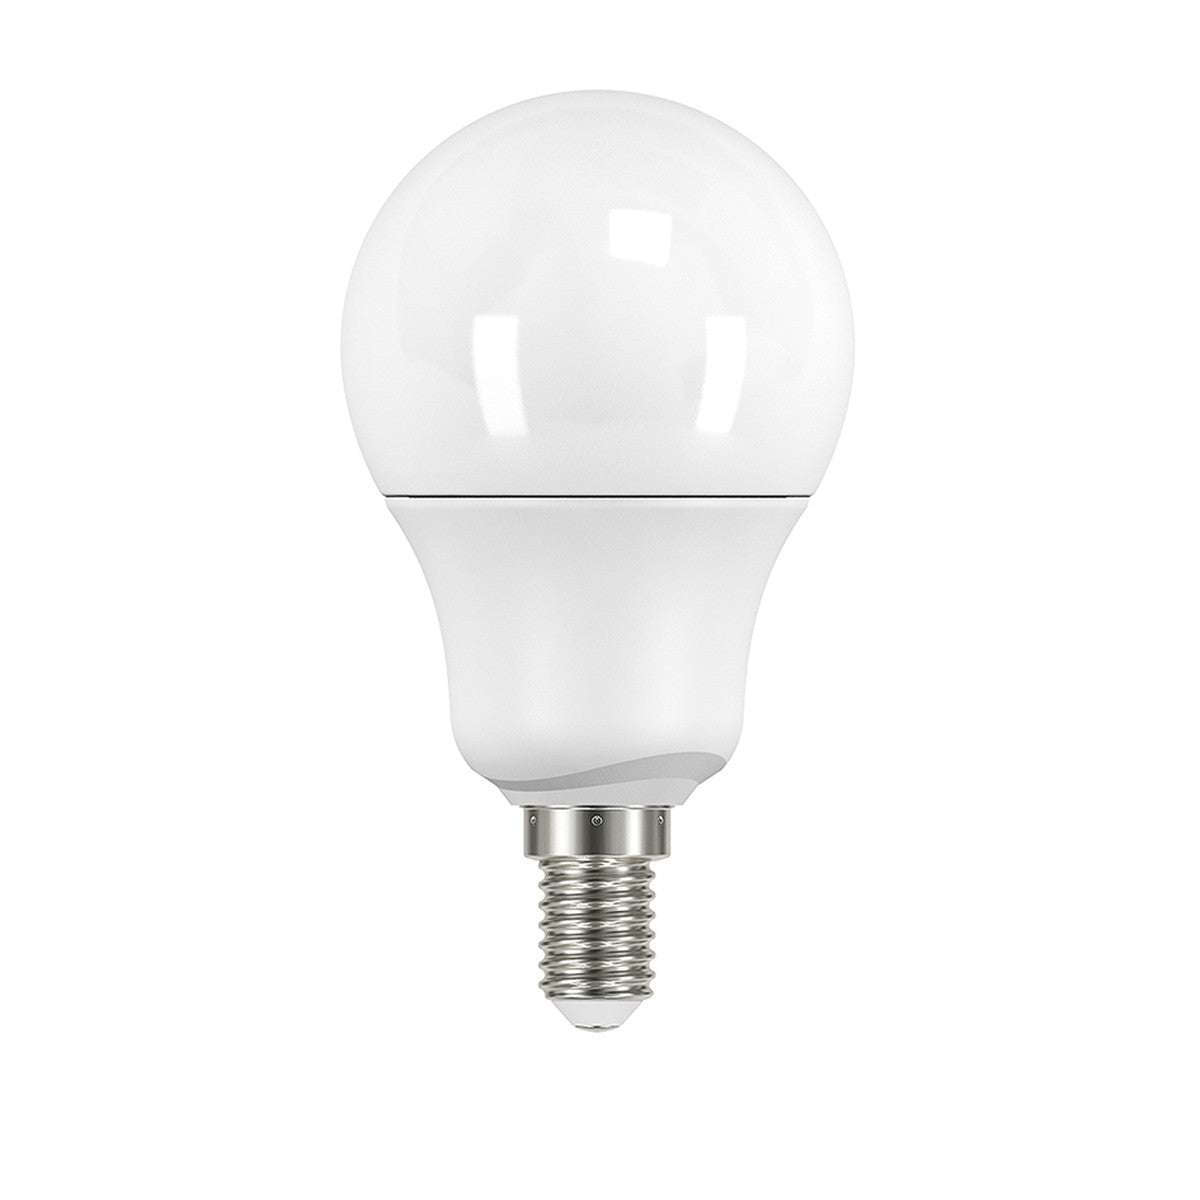 Touch Lamp Dimmable 6.8W E14 LED Lamp - London Lighting - 1